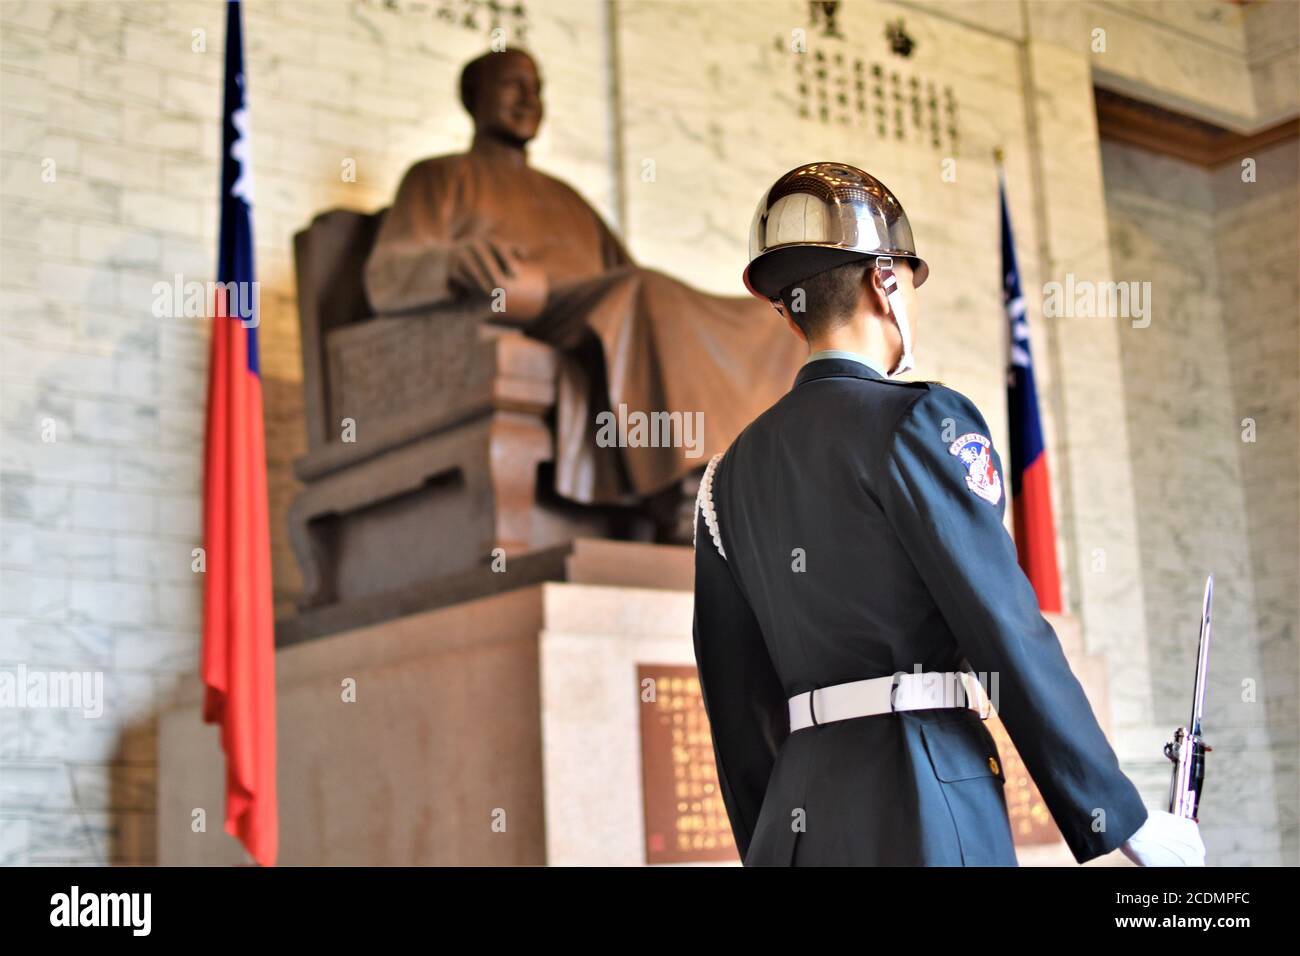 An honor guard in full ceremonial uniform stands beside the bronze statue of Chiang Kai-shek in Taipei Stock Photo